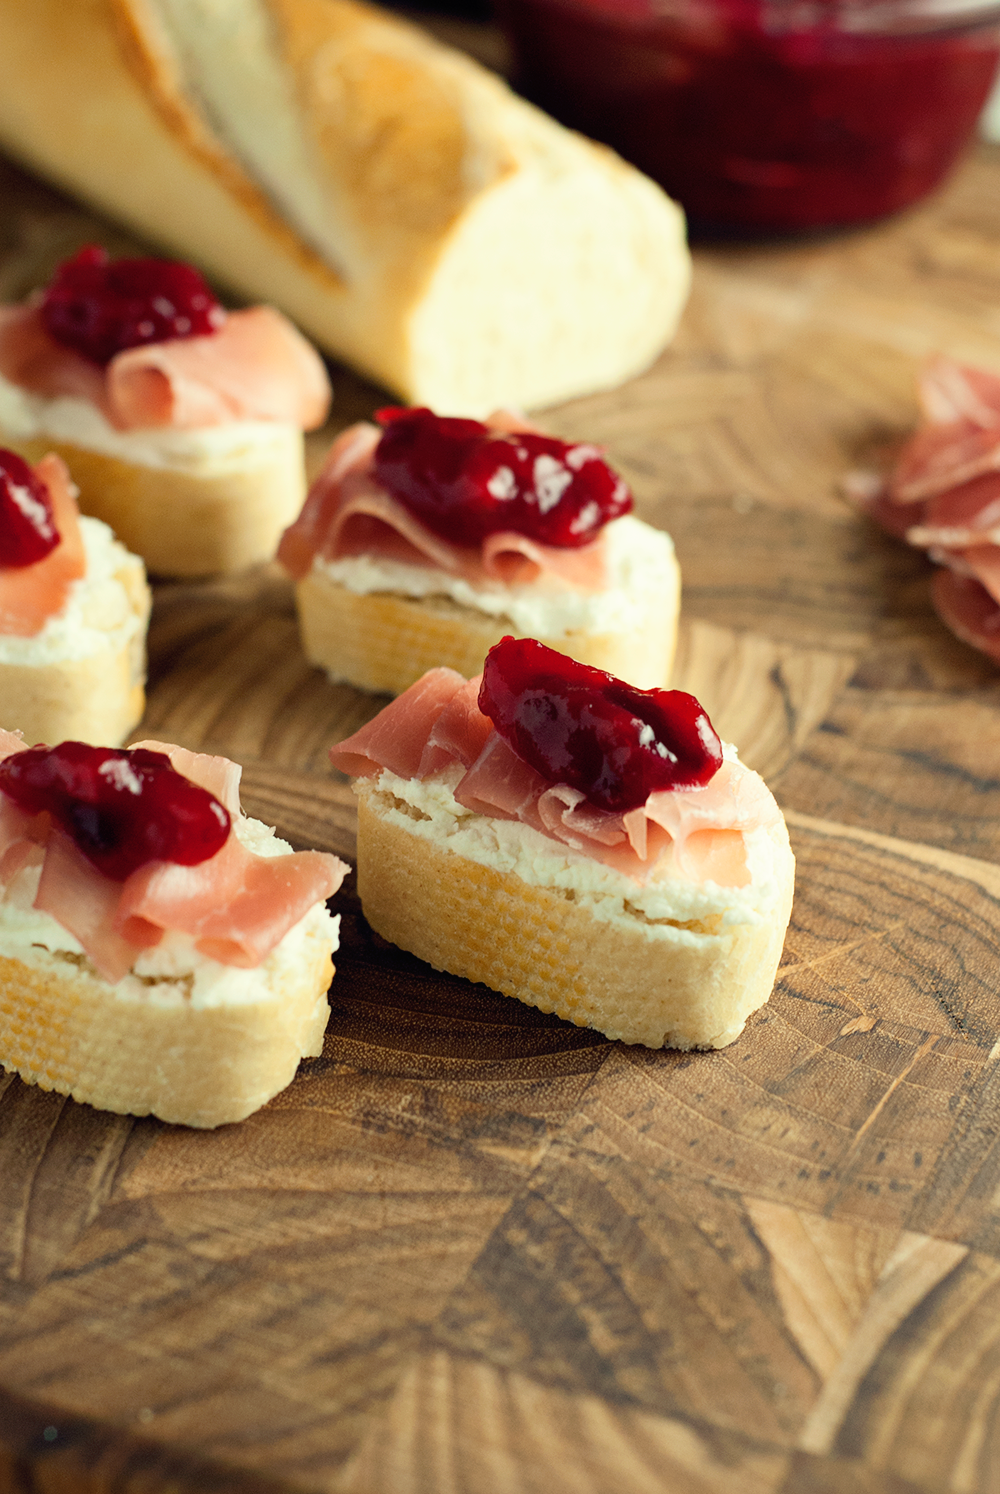 Make the perfect party appetizer with these goat cheese, prosciutto, and cranberry crostini!